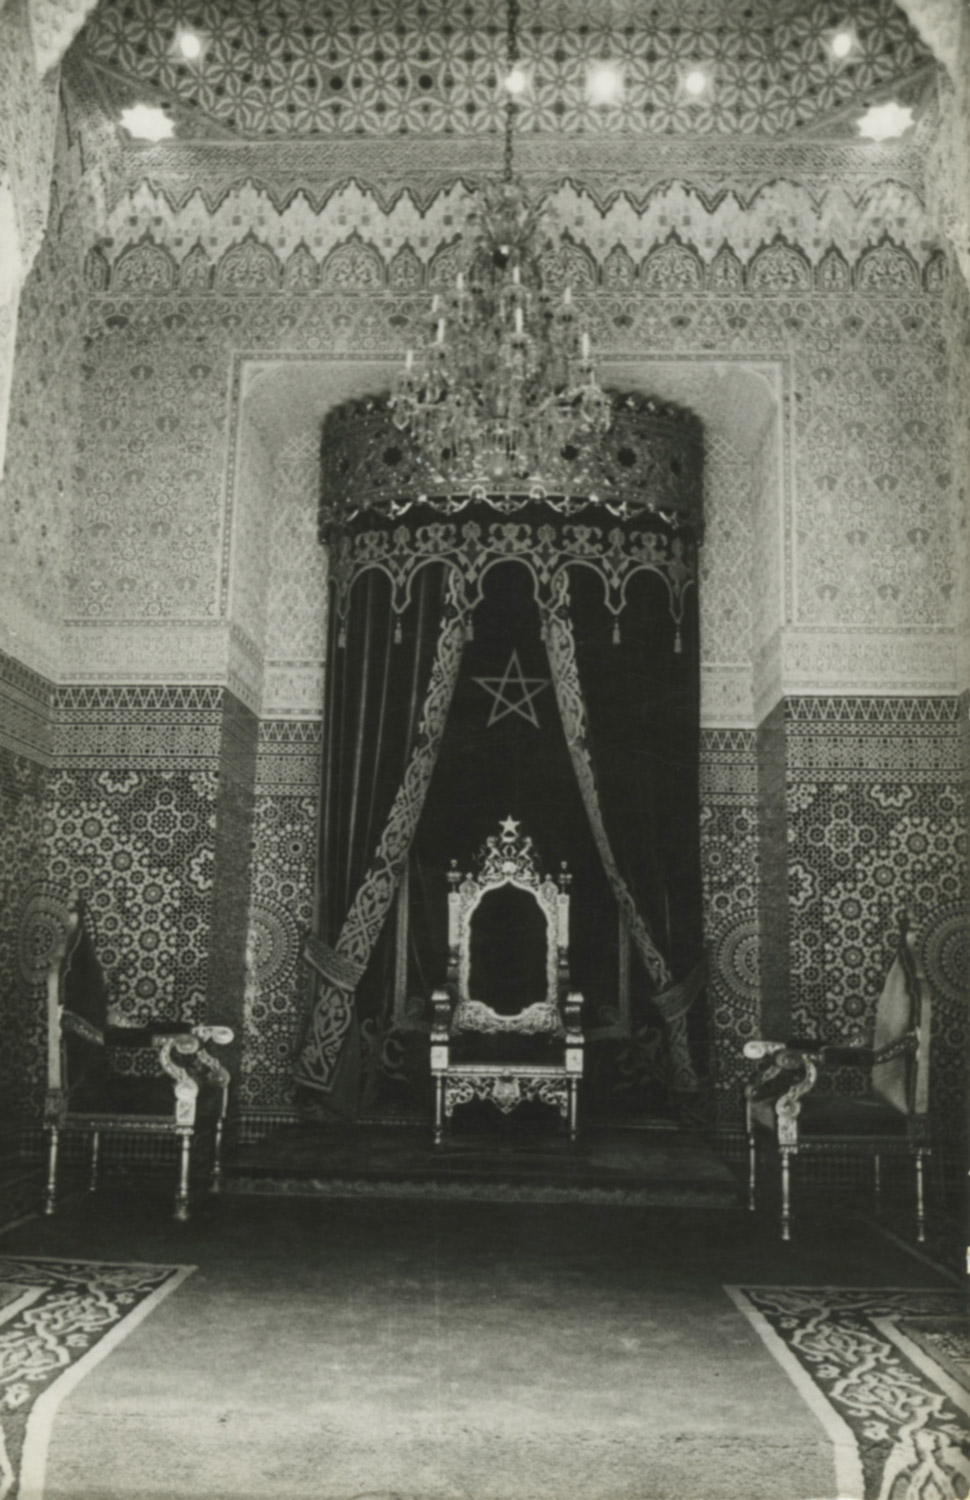 Interior view toward the throne of the Royal Palace in Tetouan